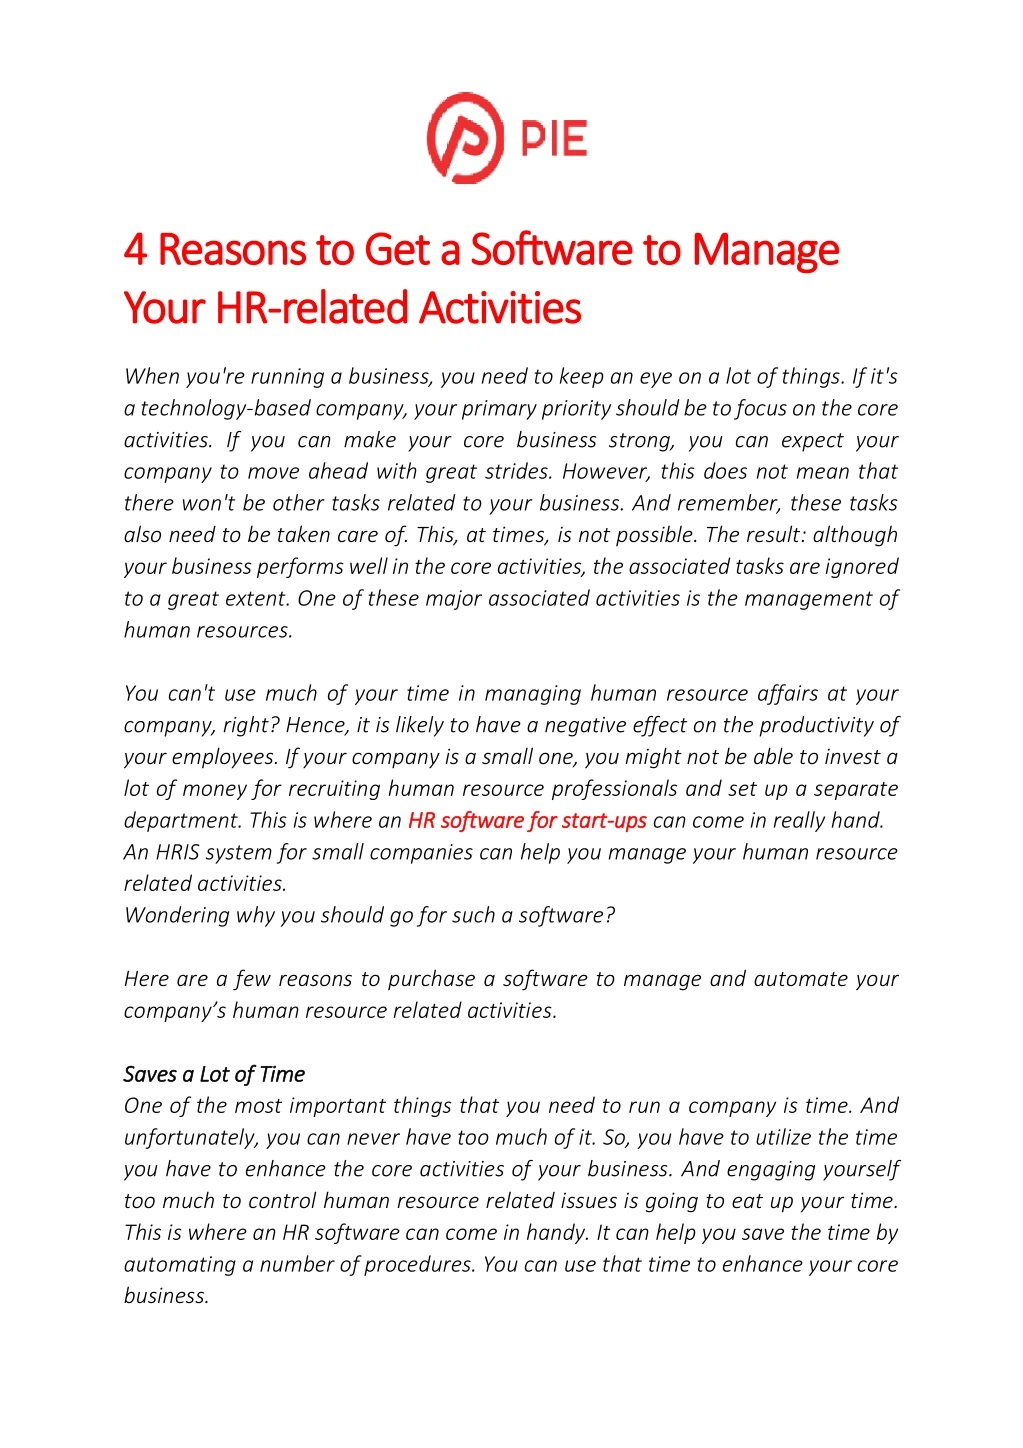 4 reasons to get a software to manage 4 reasons